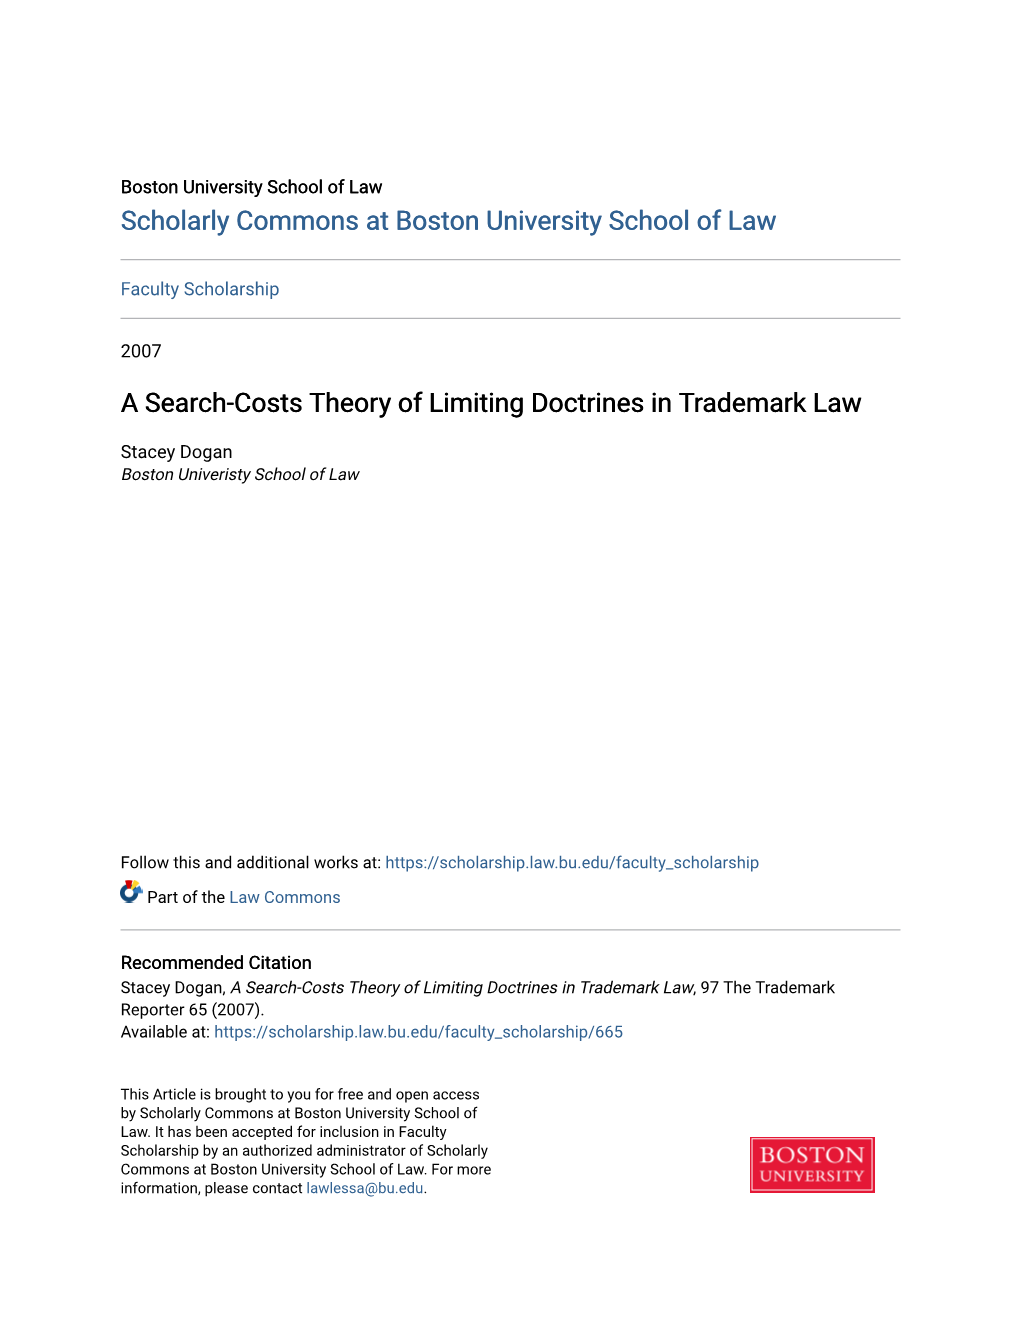 A Search-Costs Theory of Limiting Doctrines in Trademark Law